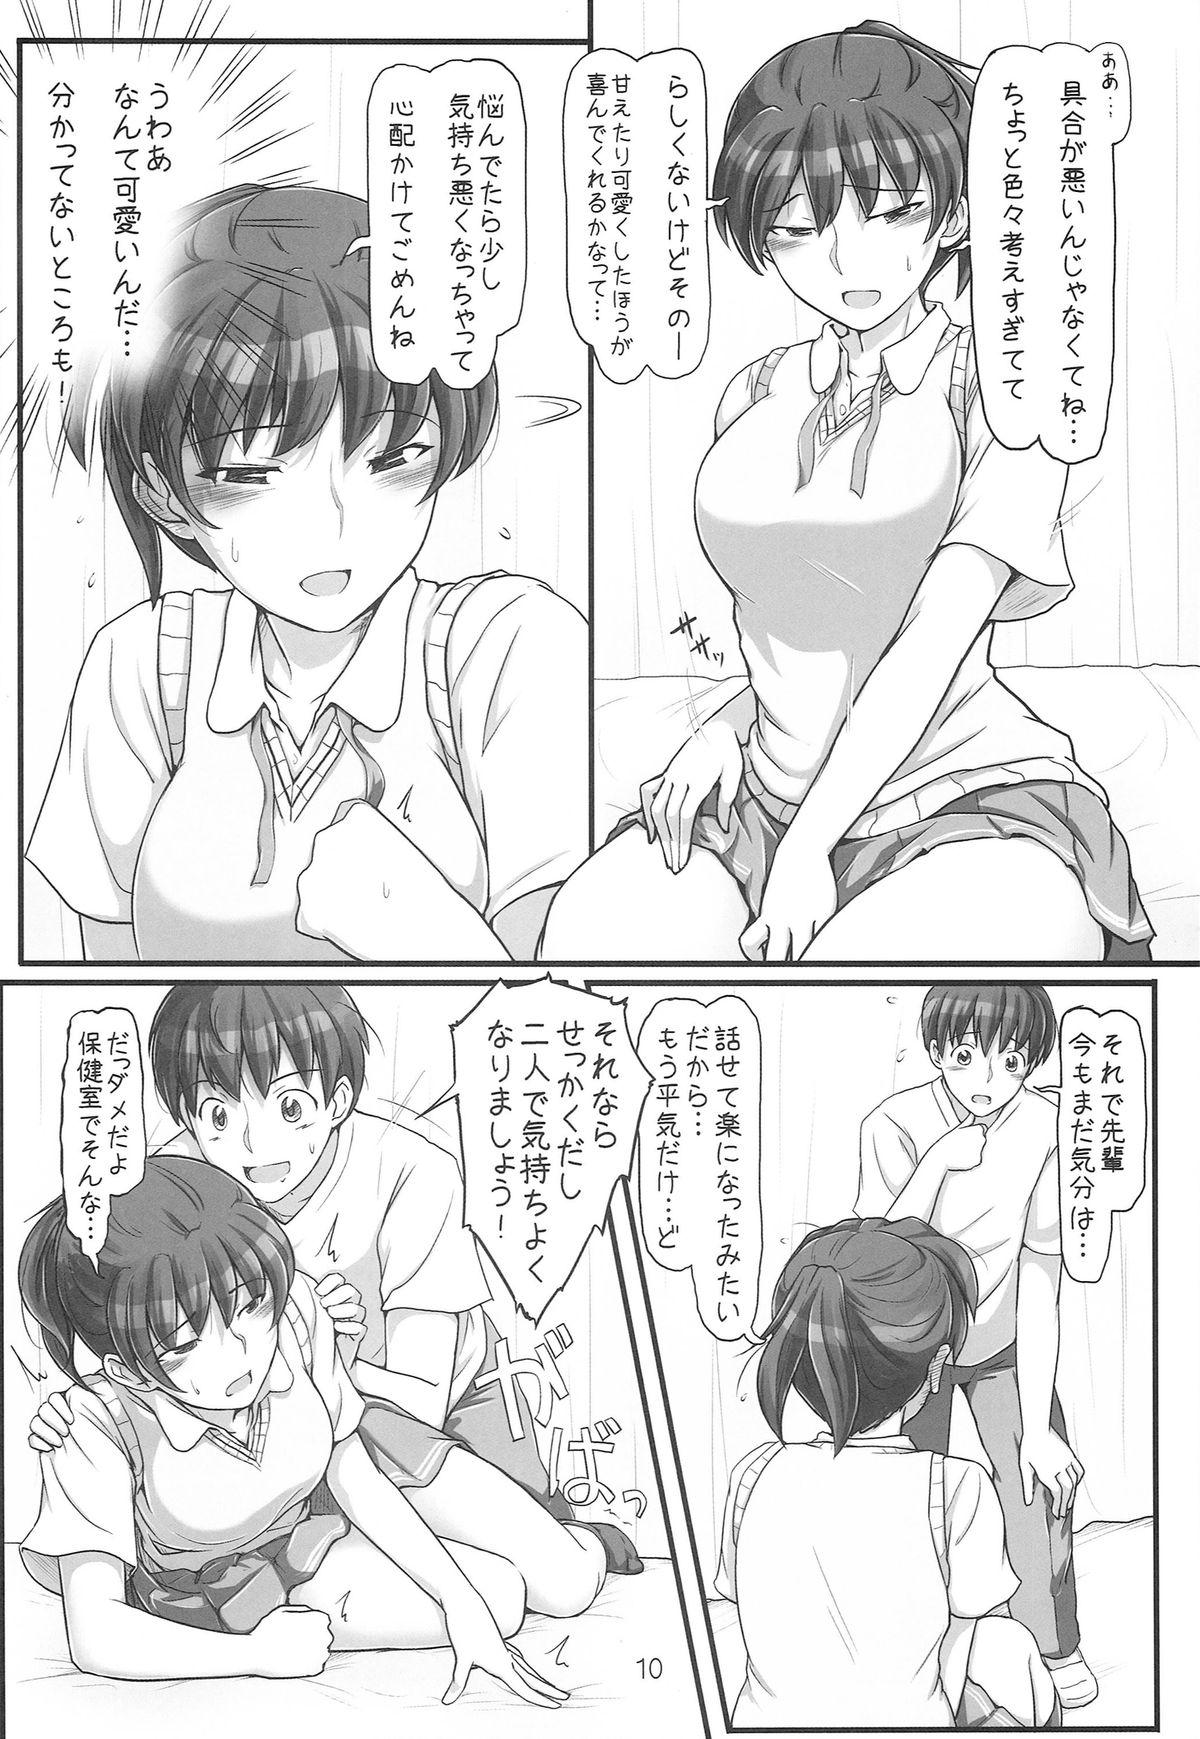 Online sweet training - Amagami Jerking Off - Page 10